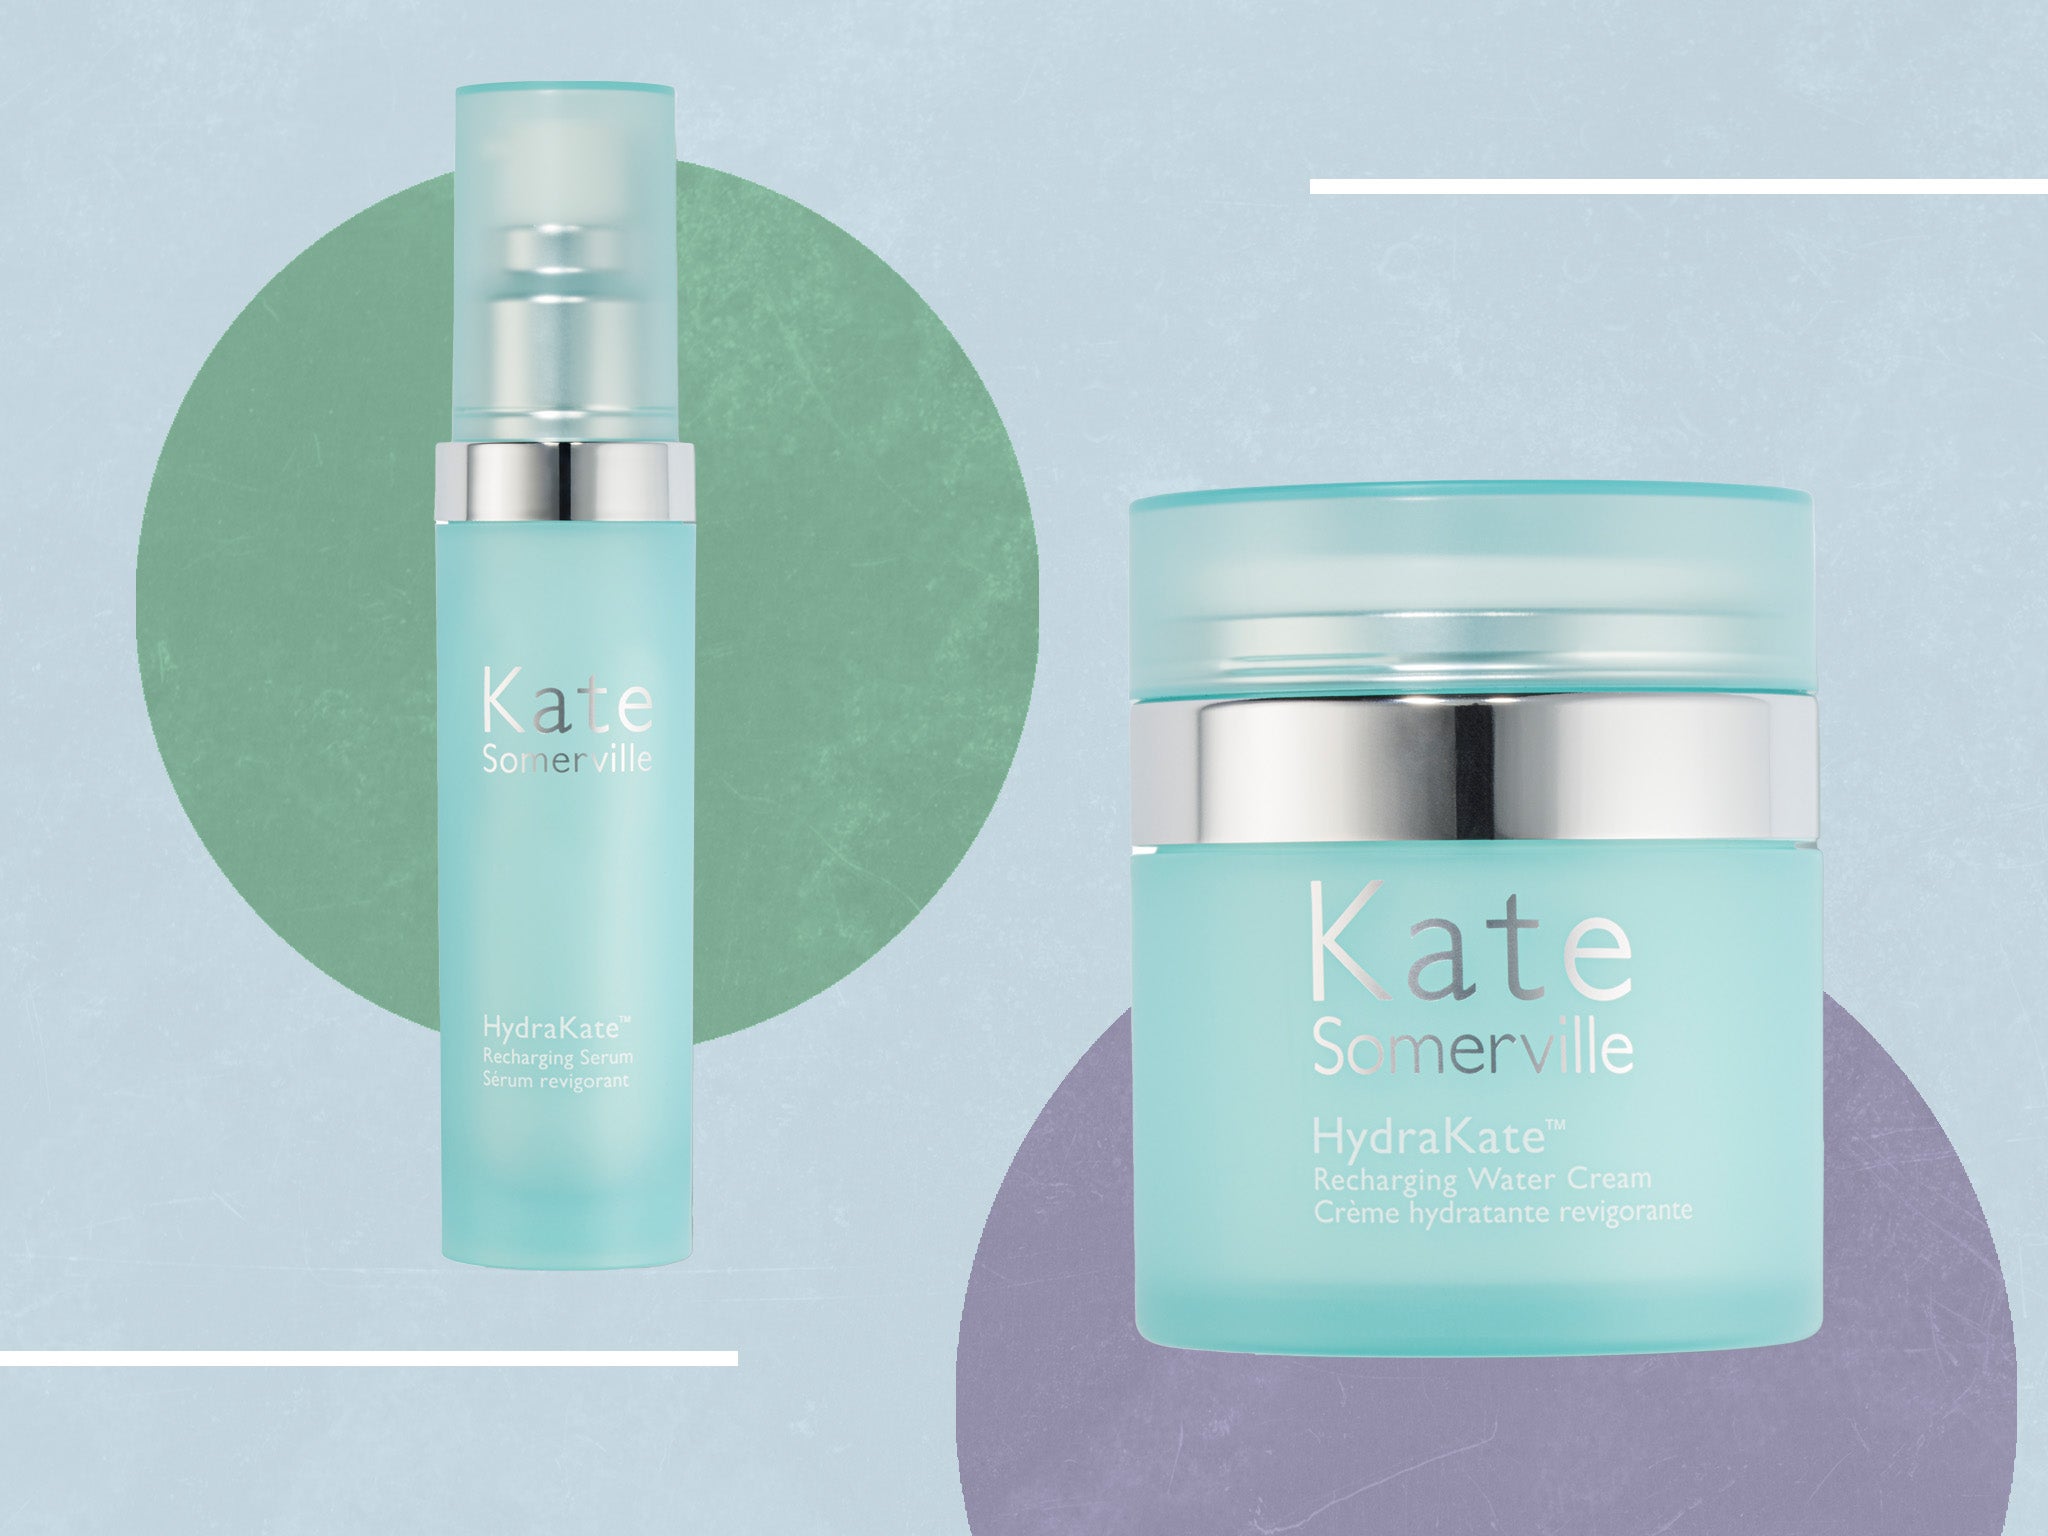 Kate Somerville hydrakate review: Does the recharging formula deliver?